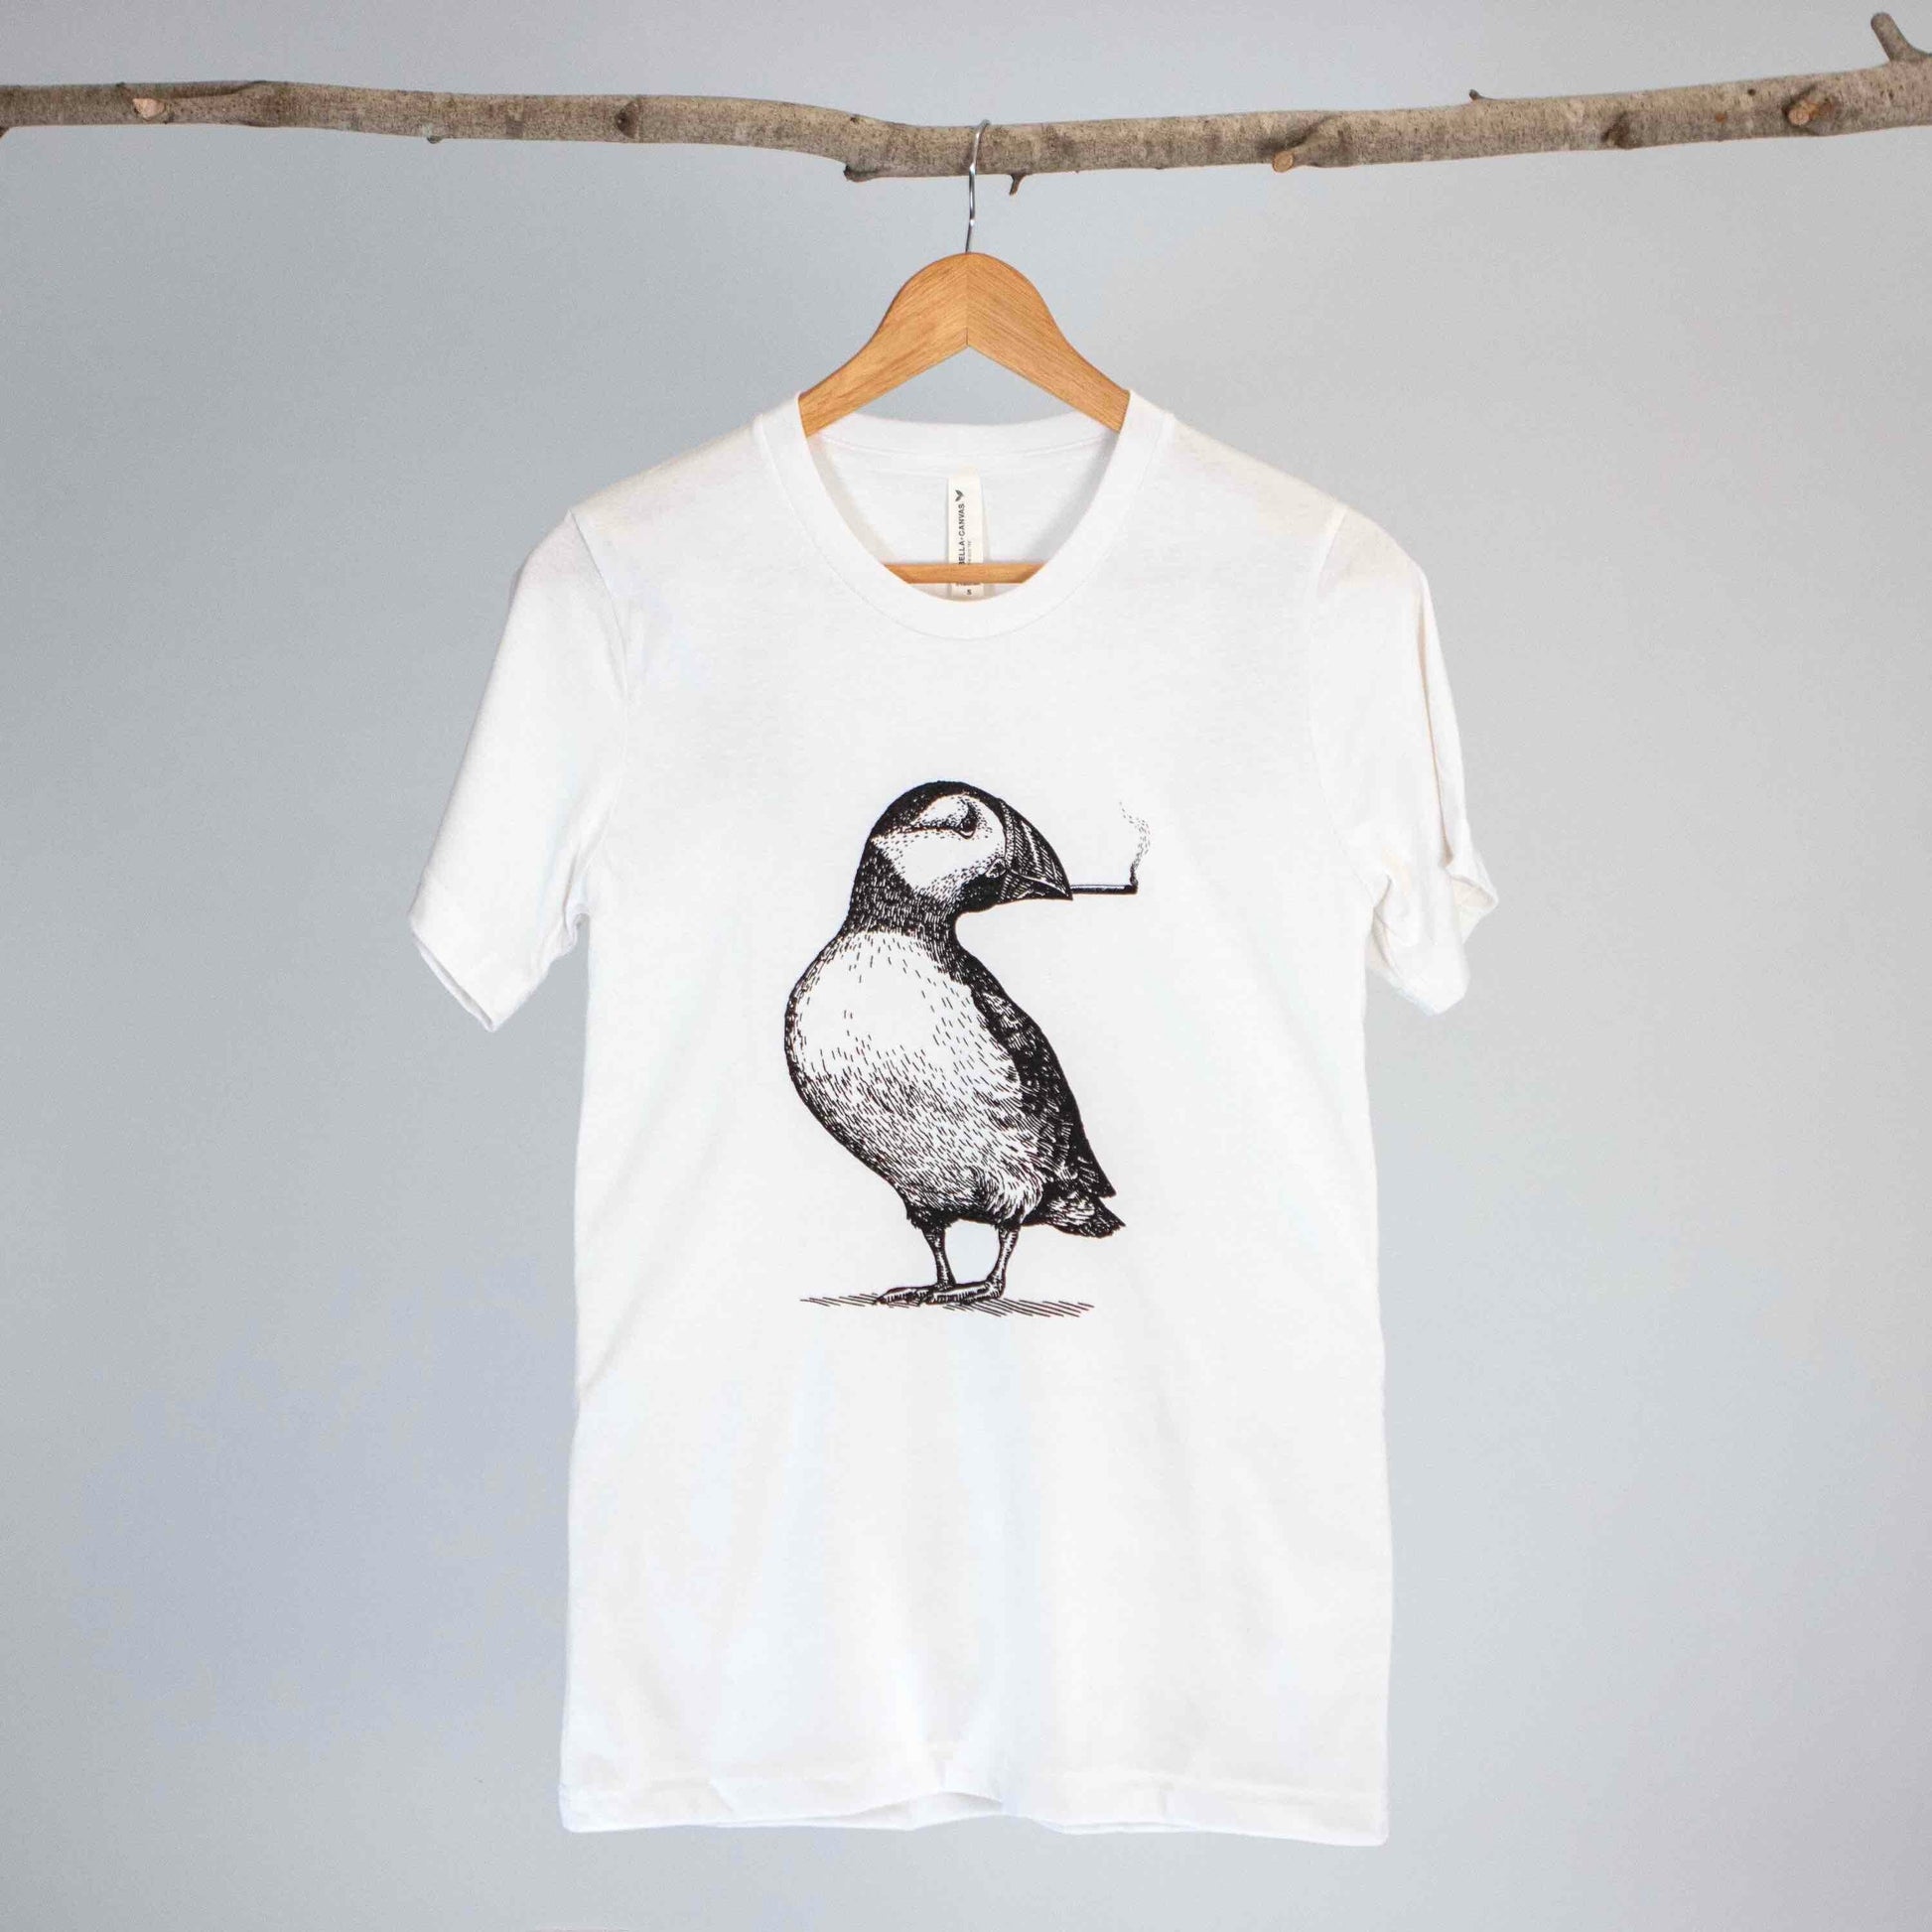 Puffin’ Puffin Eco-Tee - Sustainable Clothing - Funny Puffin Shirt - Organic and Recycled T-shirt - 420 Apparel - Maine Gift and Souvenir